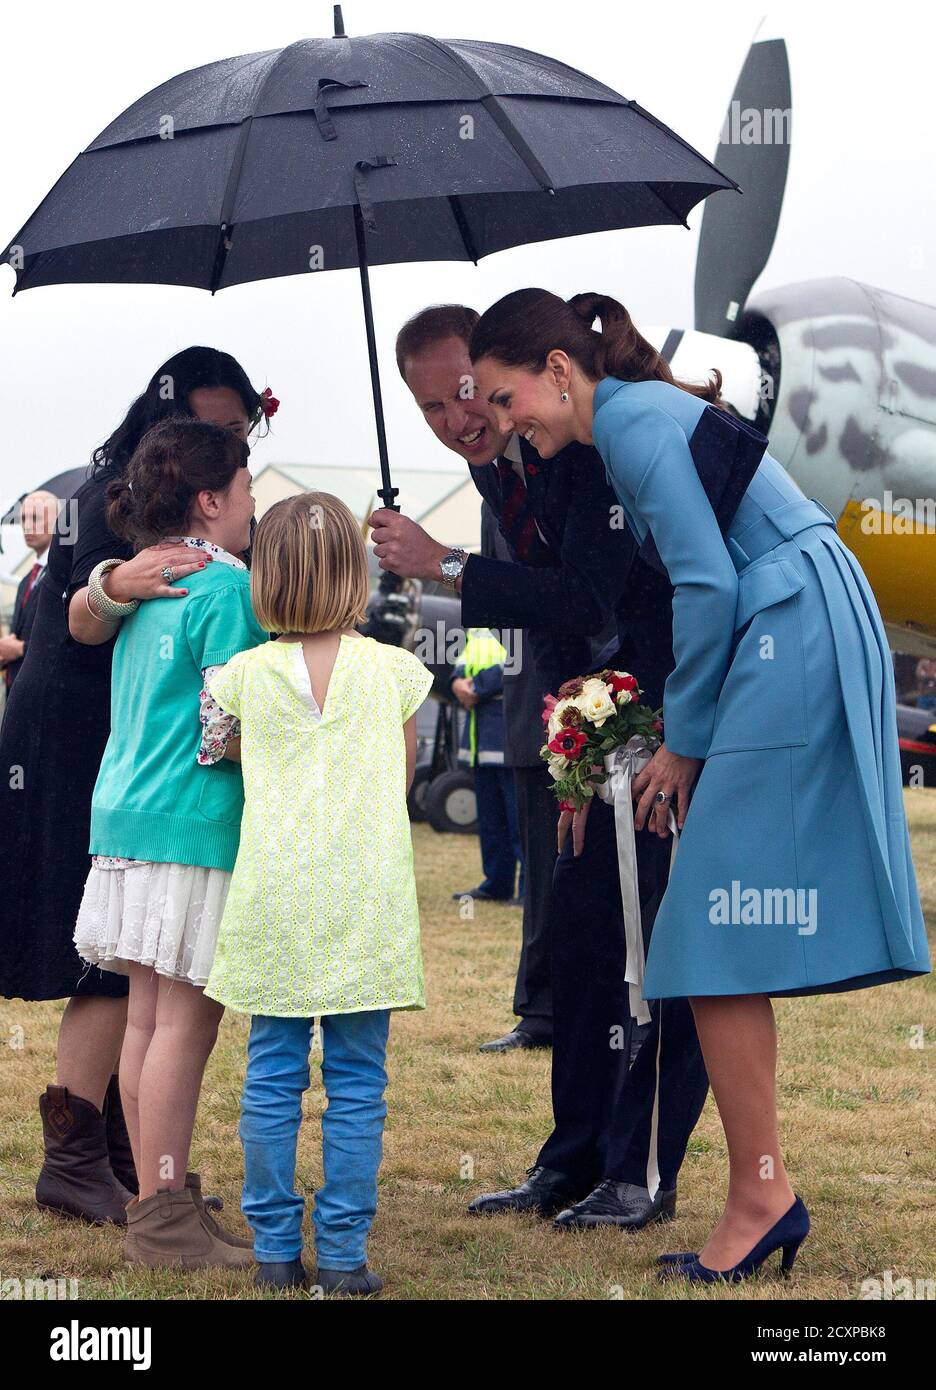 Britain's Prince William holds an umbrella above his wife Catherine ...